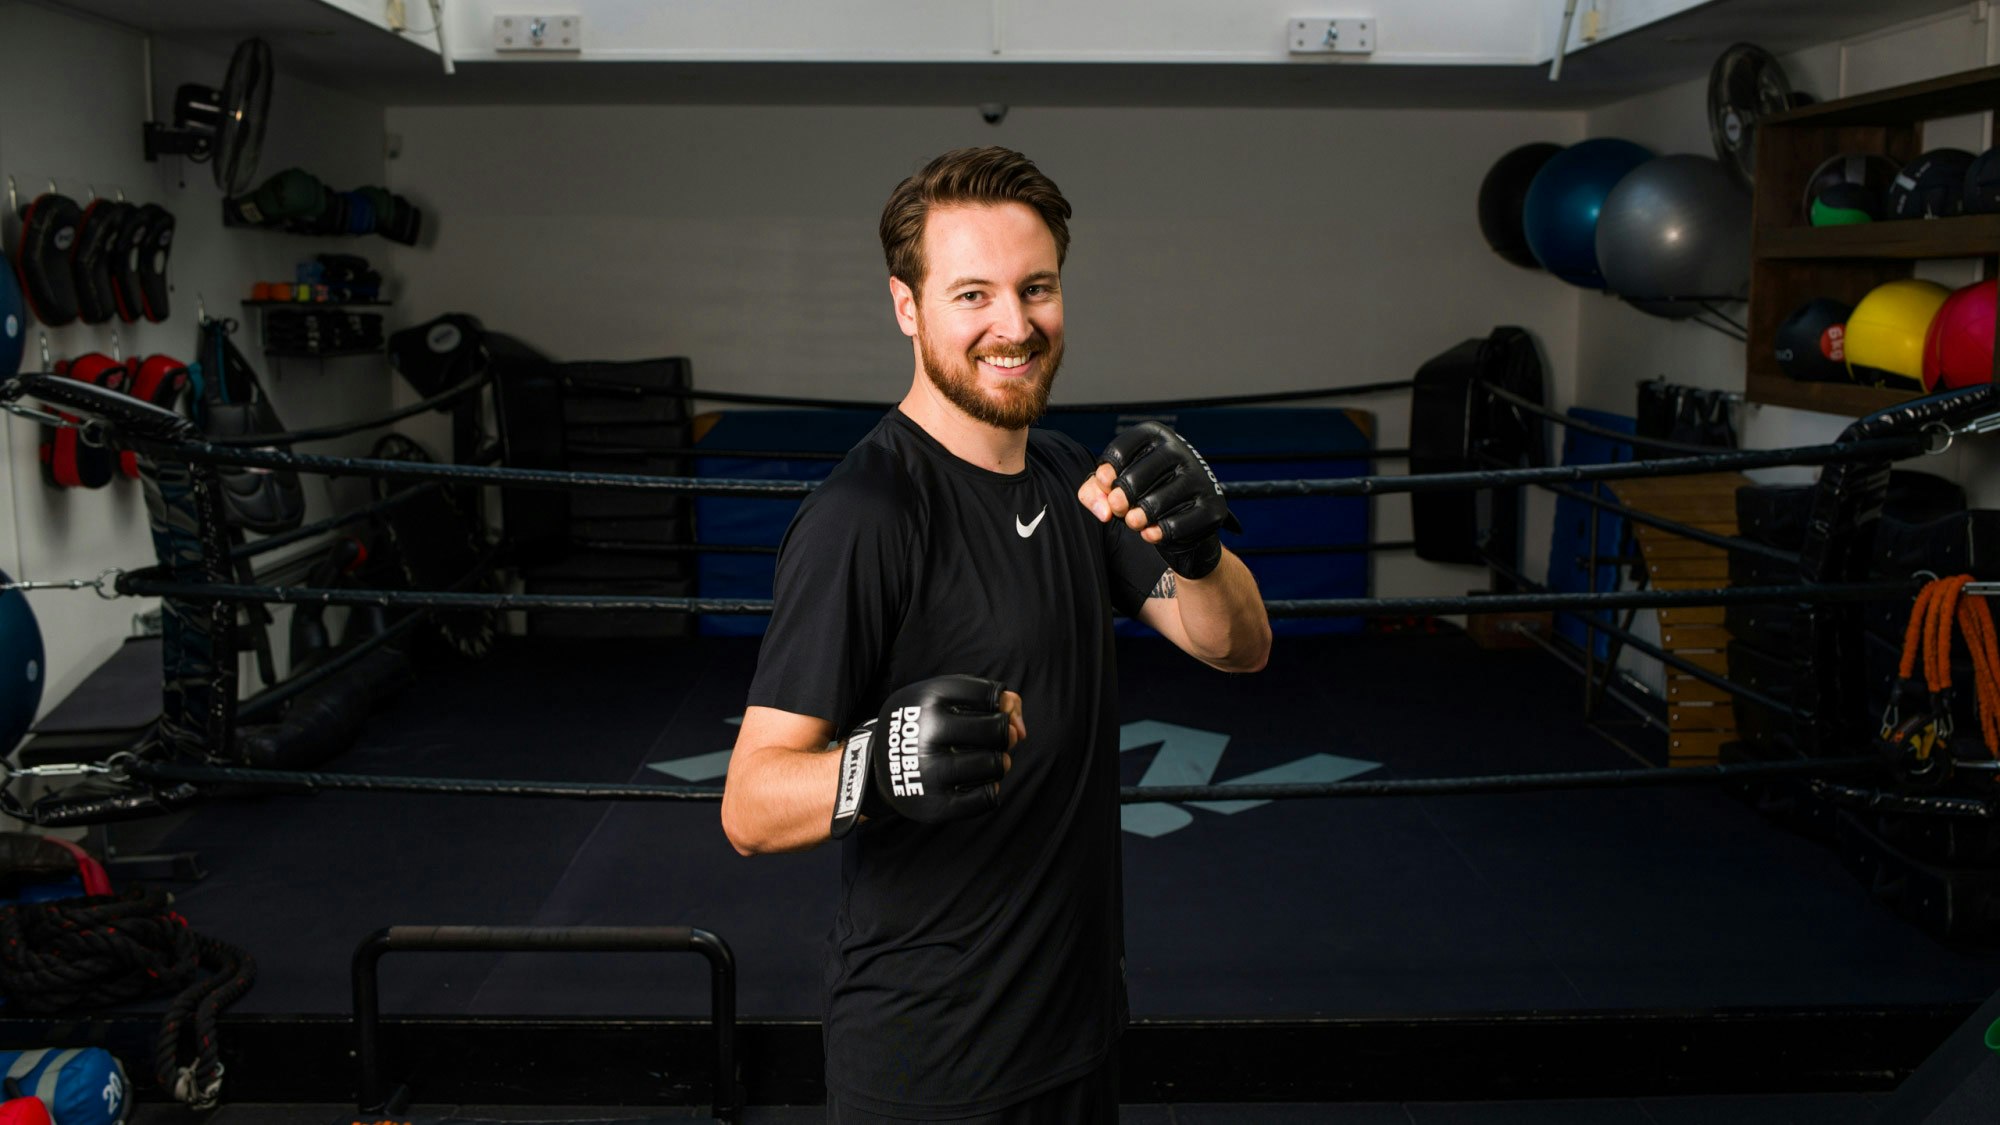 Kevin Krifter in front of a boxing ring.